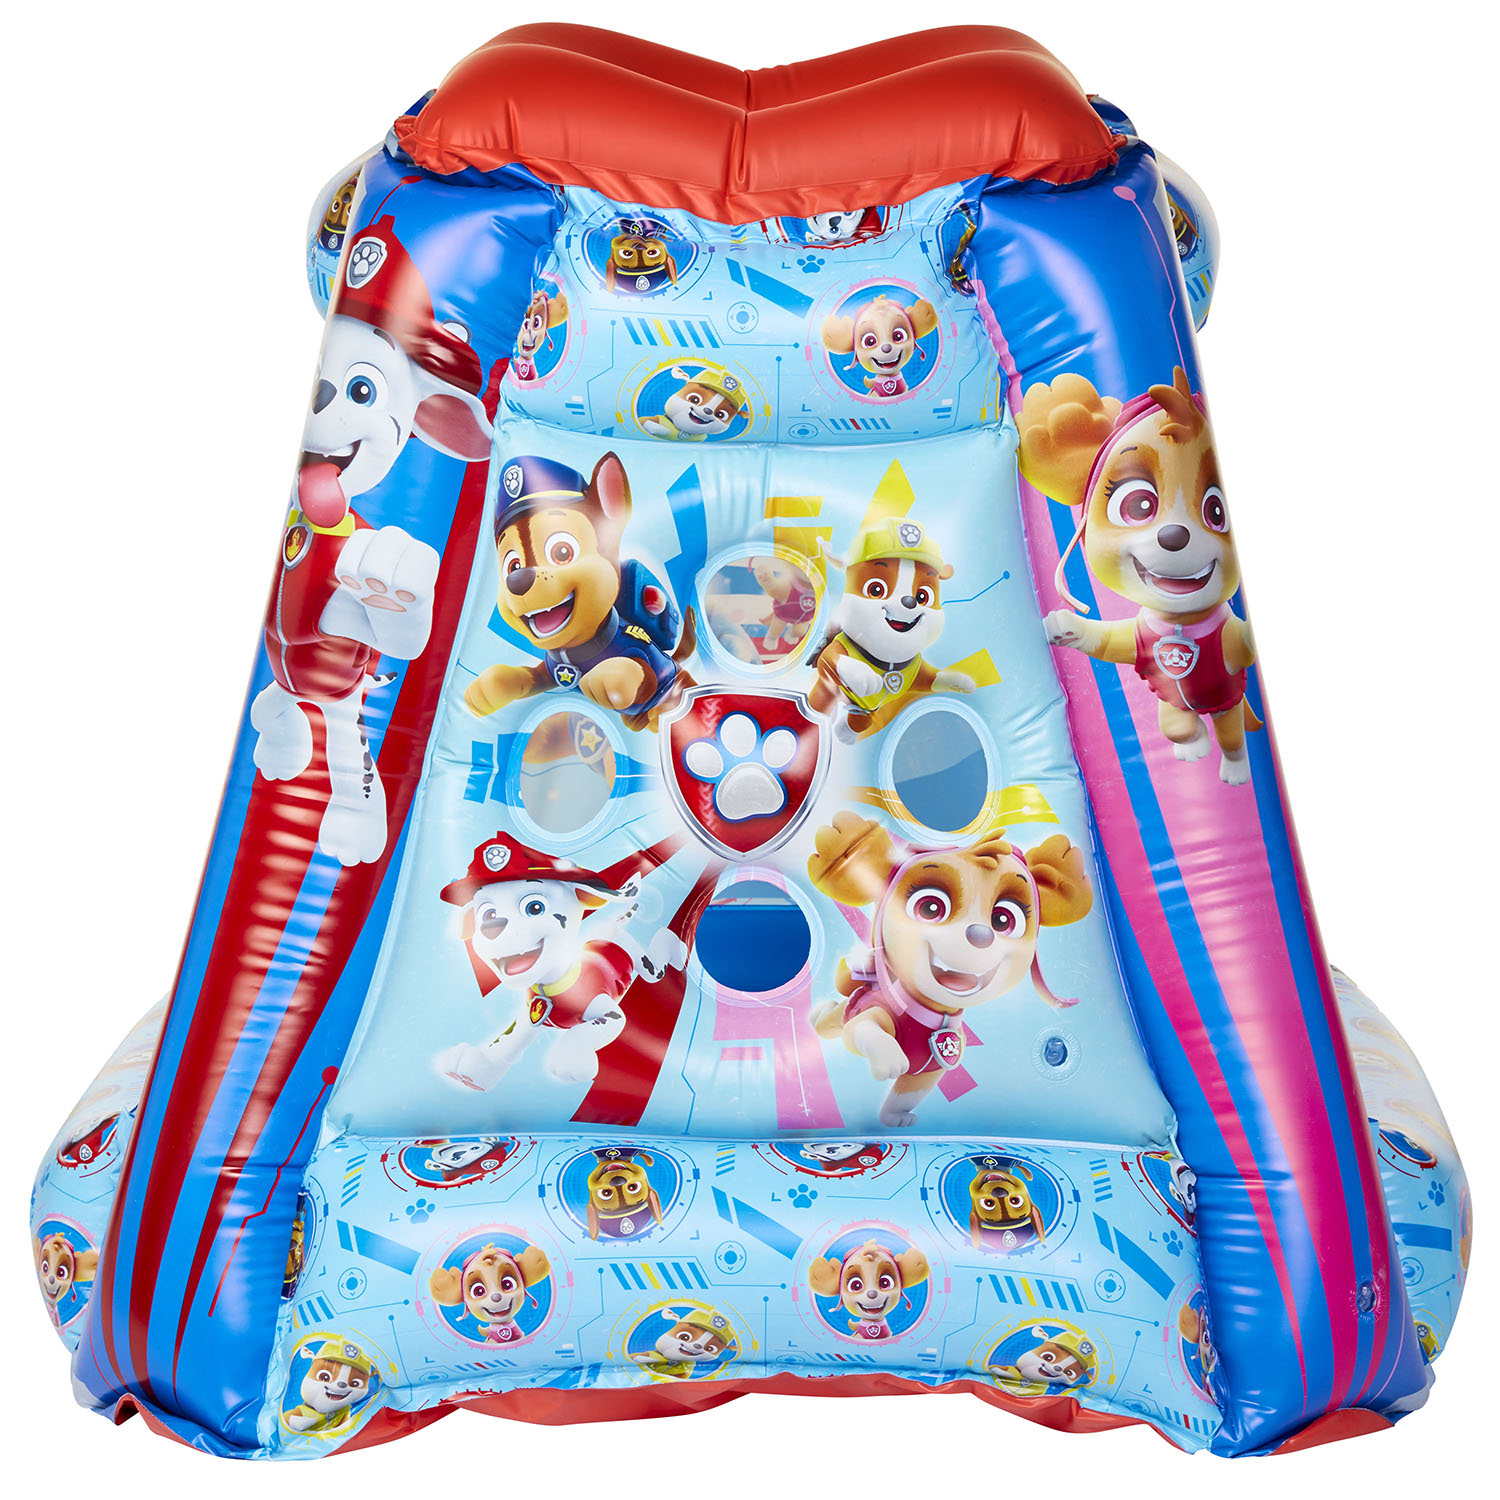 Paw Patrol Inflatable Playland Ball Pit with 20 Soft Flex Balls - image 1 of 5